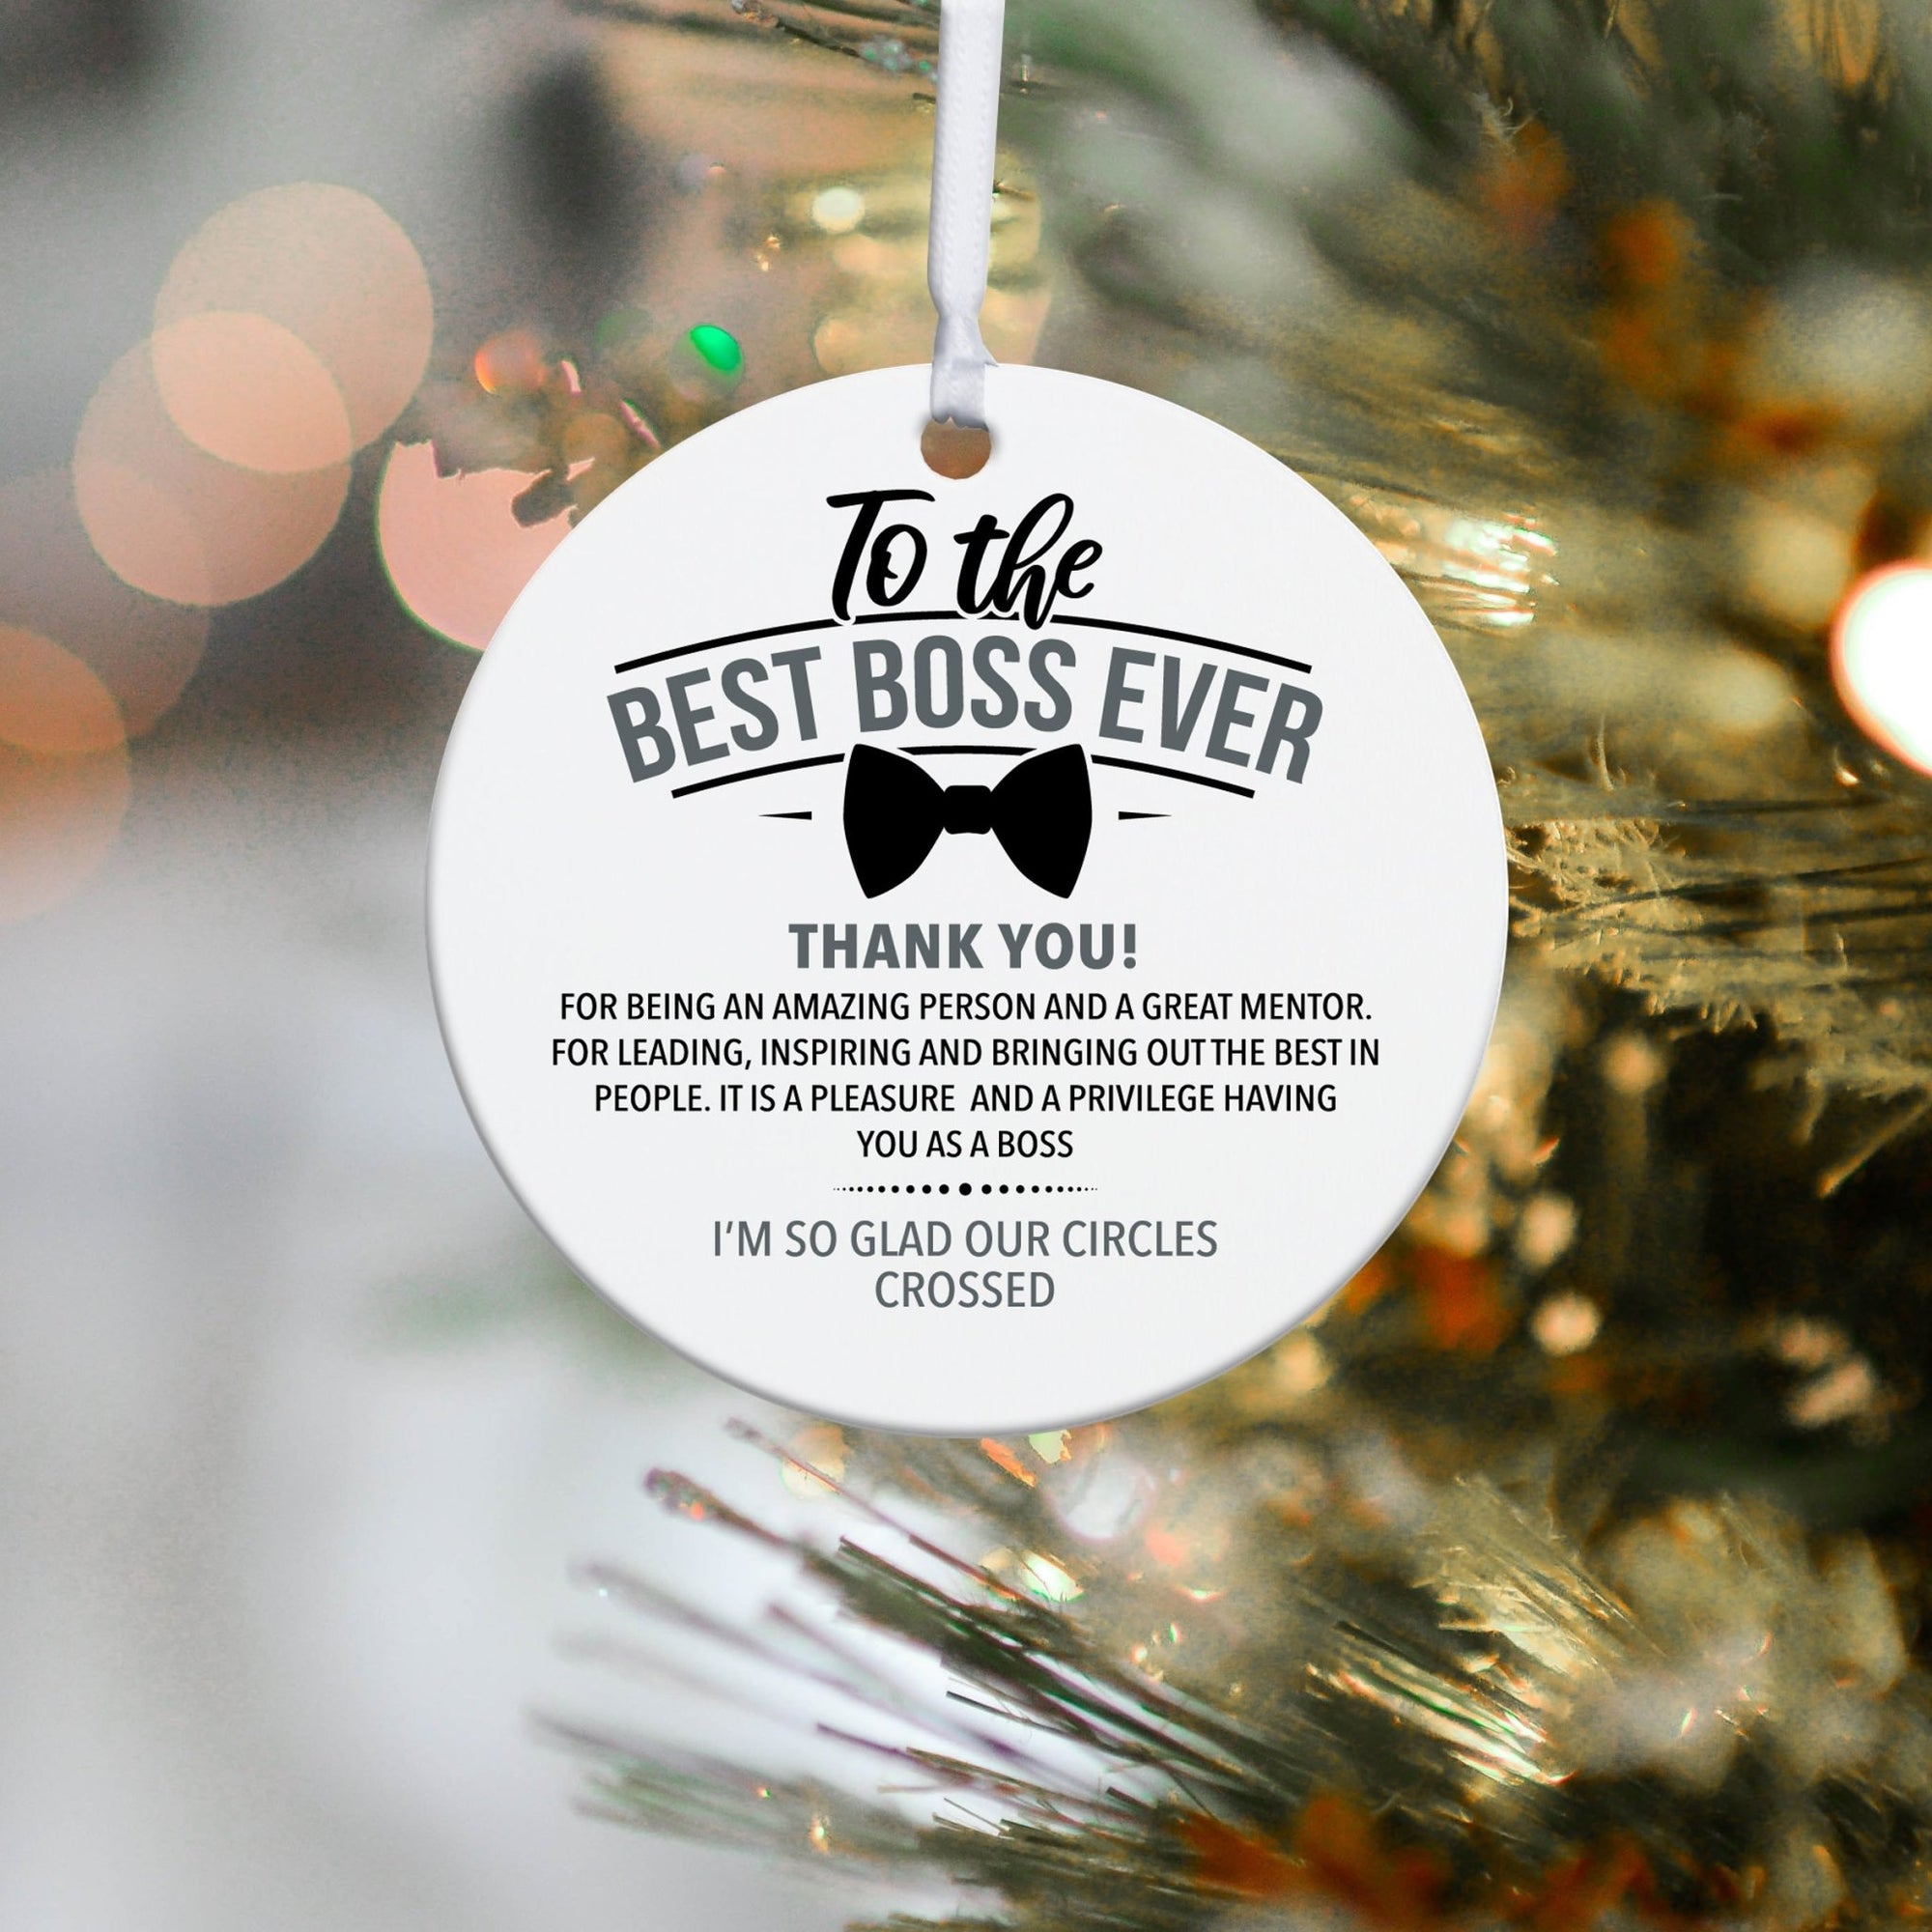 What are the Best Christmas Gift Ideas for Your Boss? - Wisestep